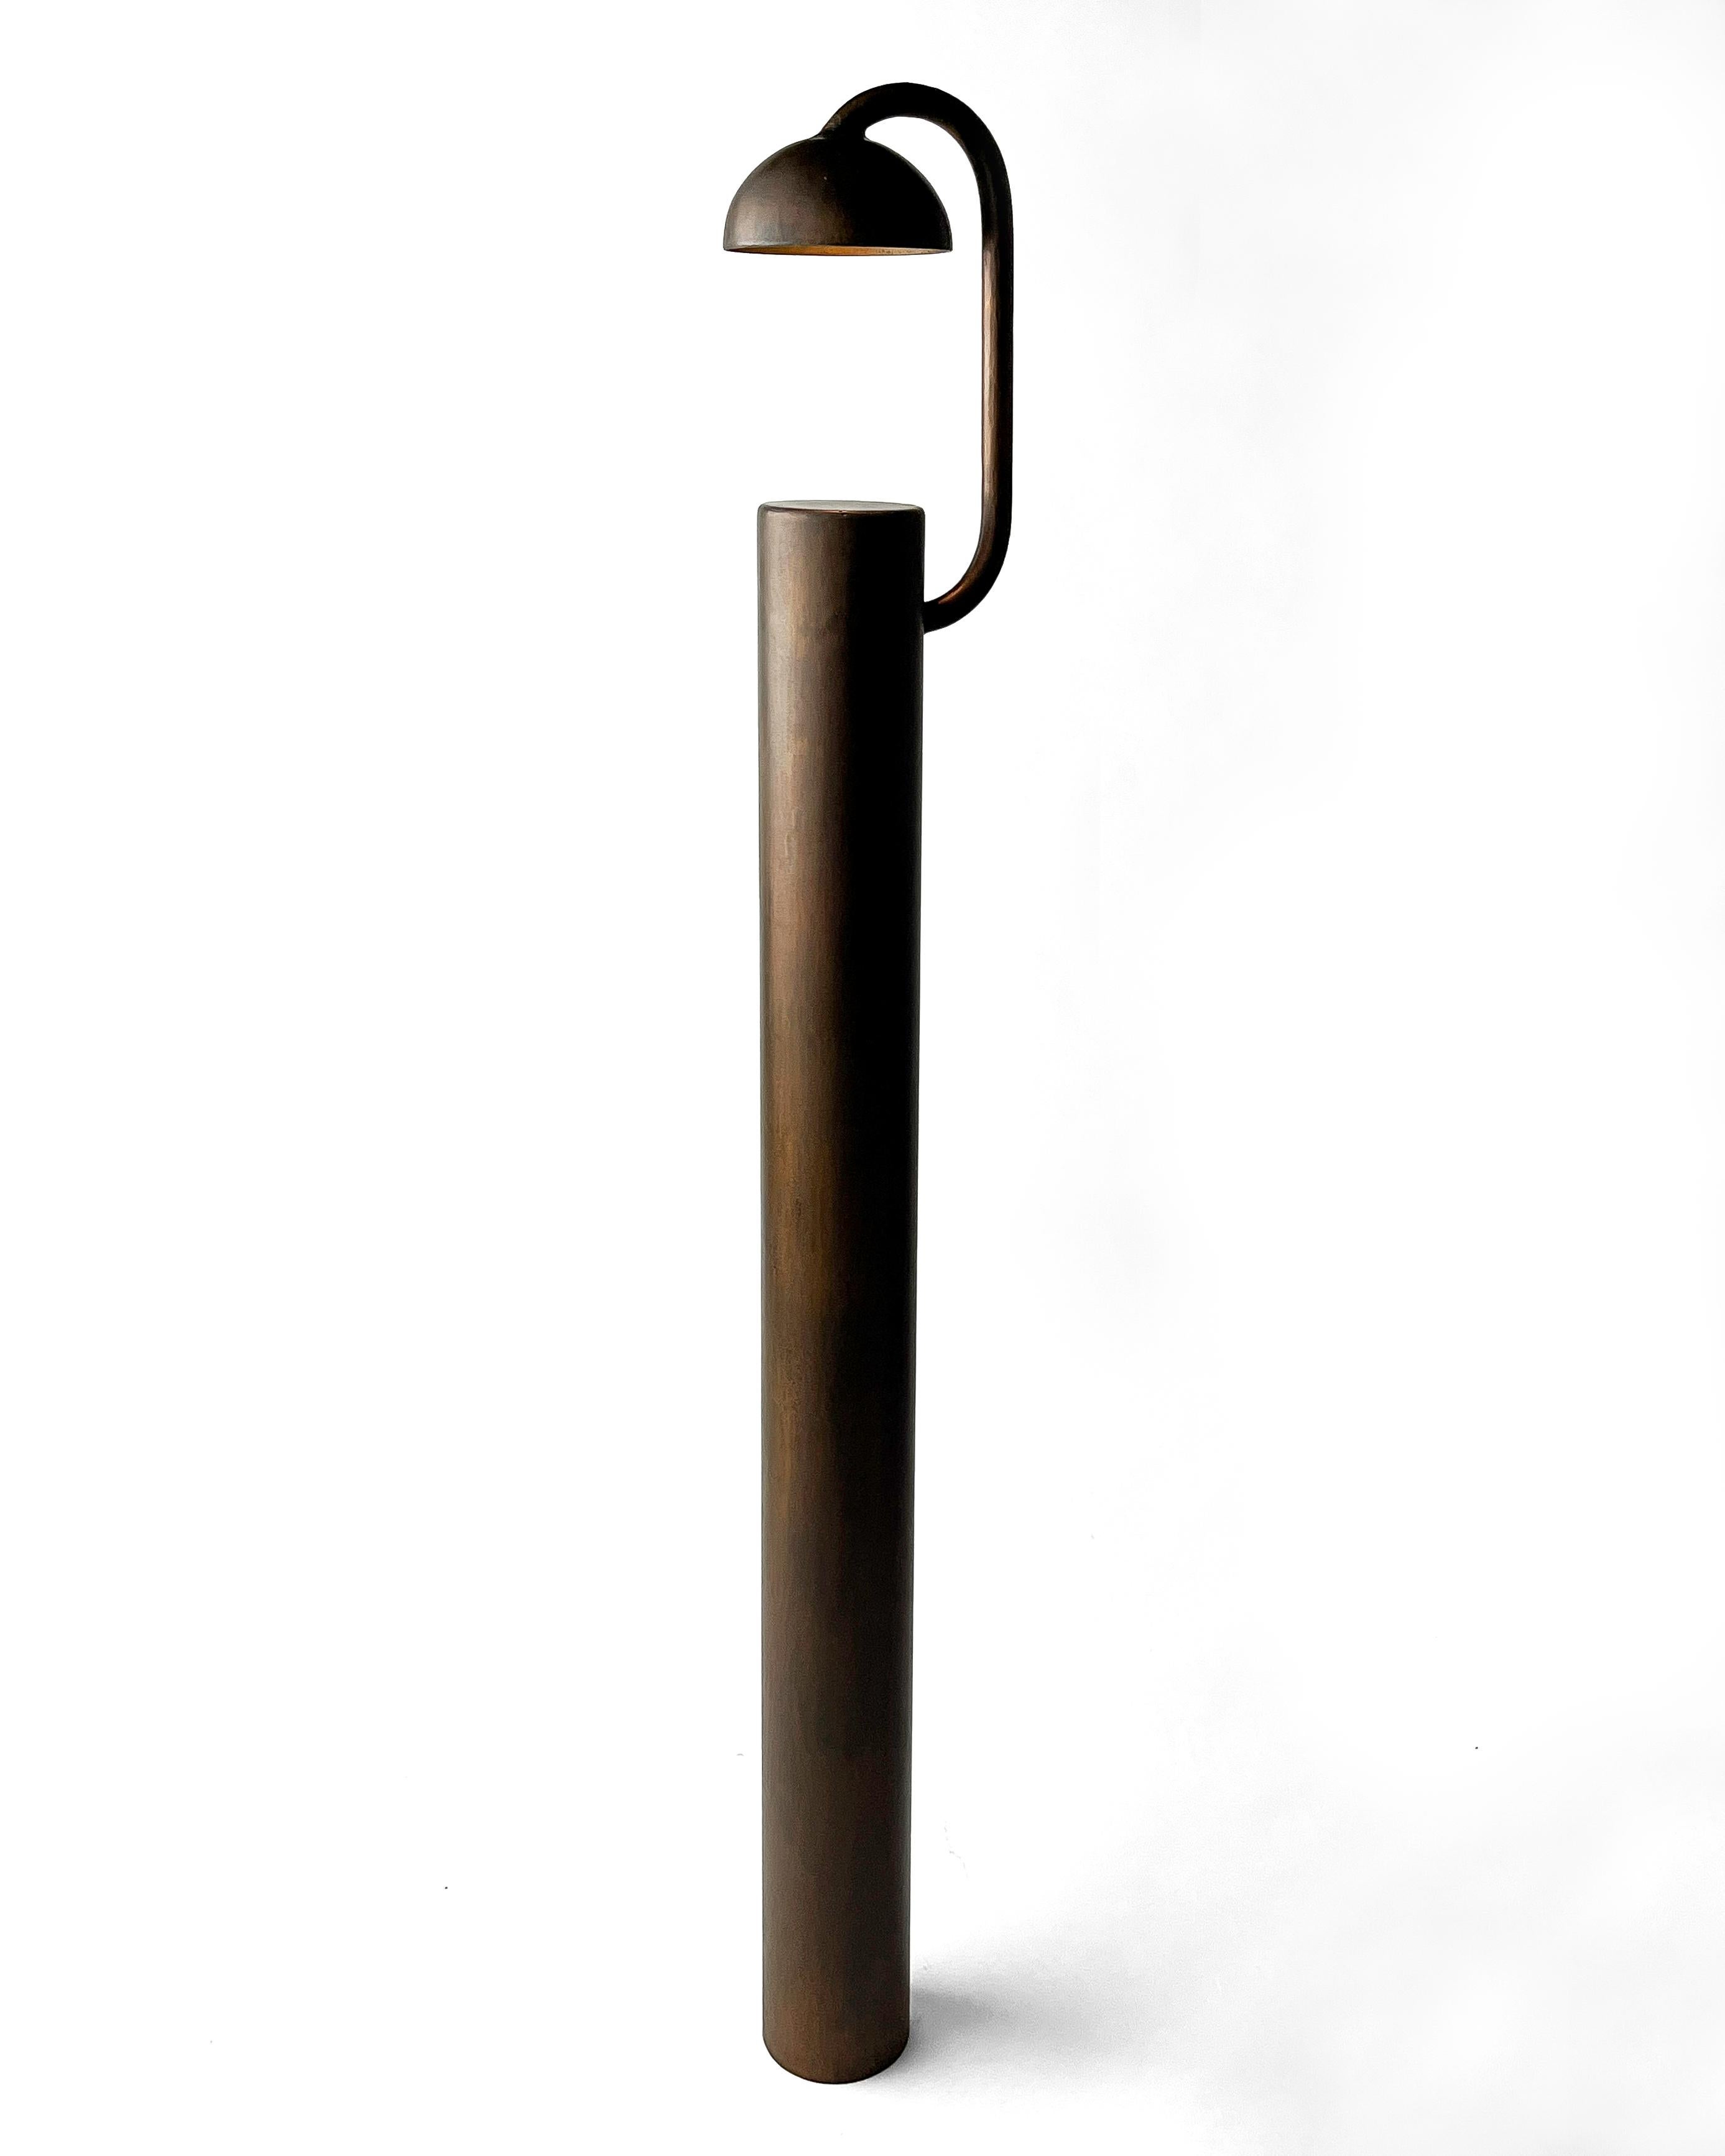 G Lamp by Cal Summers
Dimension:  W 16 x D 21 x H 148 cm
Materials: Patinated Steel.

All our lamps can be wired according to each country. If sold to the USA it will be wired for the USA for instance.

Cal Summers is a British designer who makes